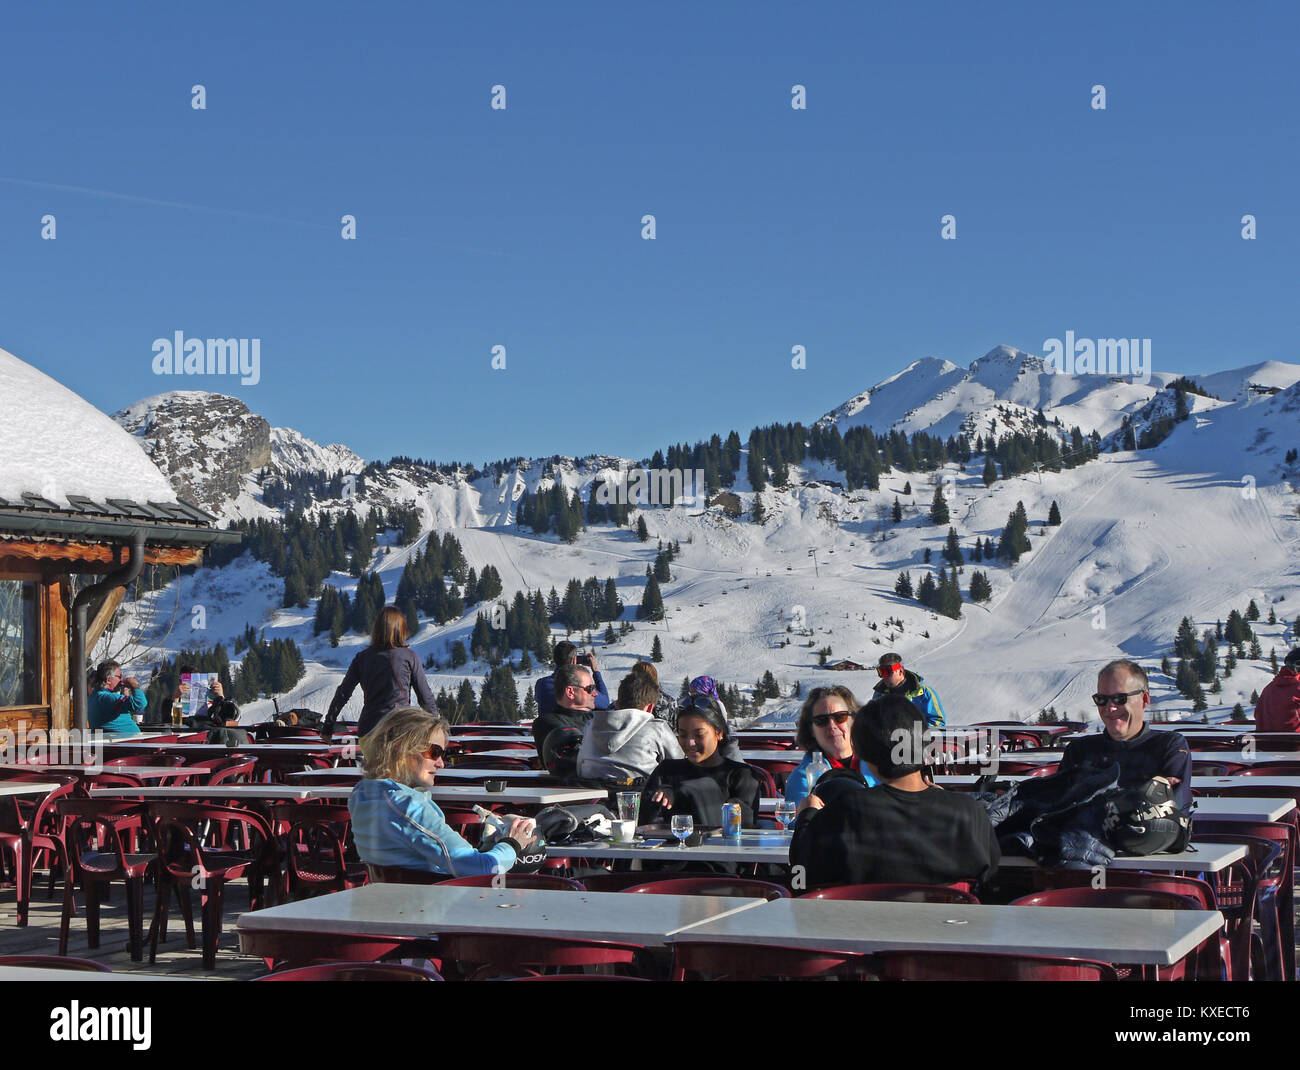 Mouflon Restaurant on the slopes at the ski and snowboard winter resort of Les Gets, France Stock Photo